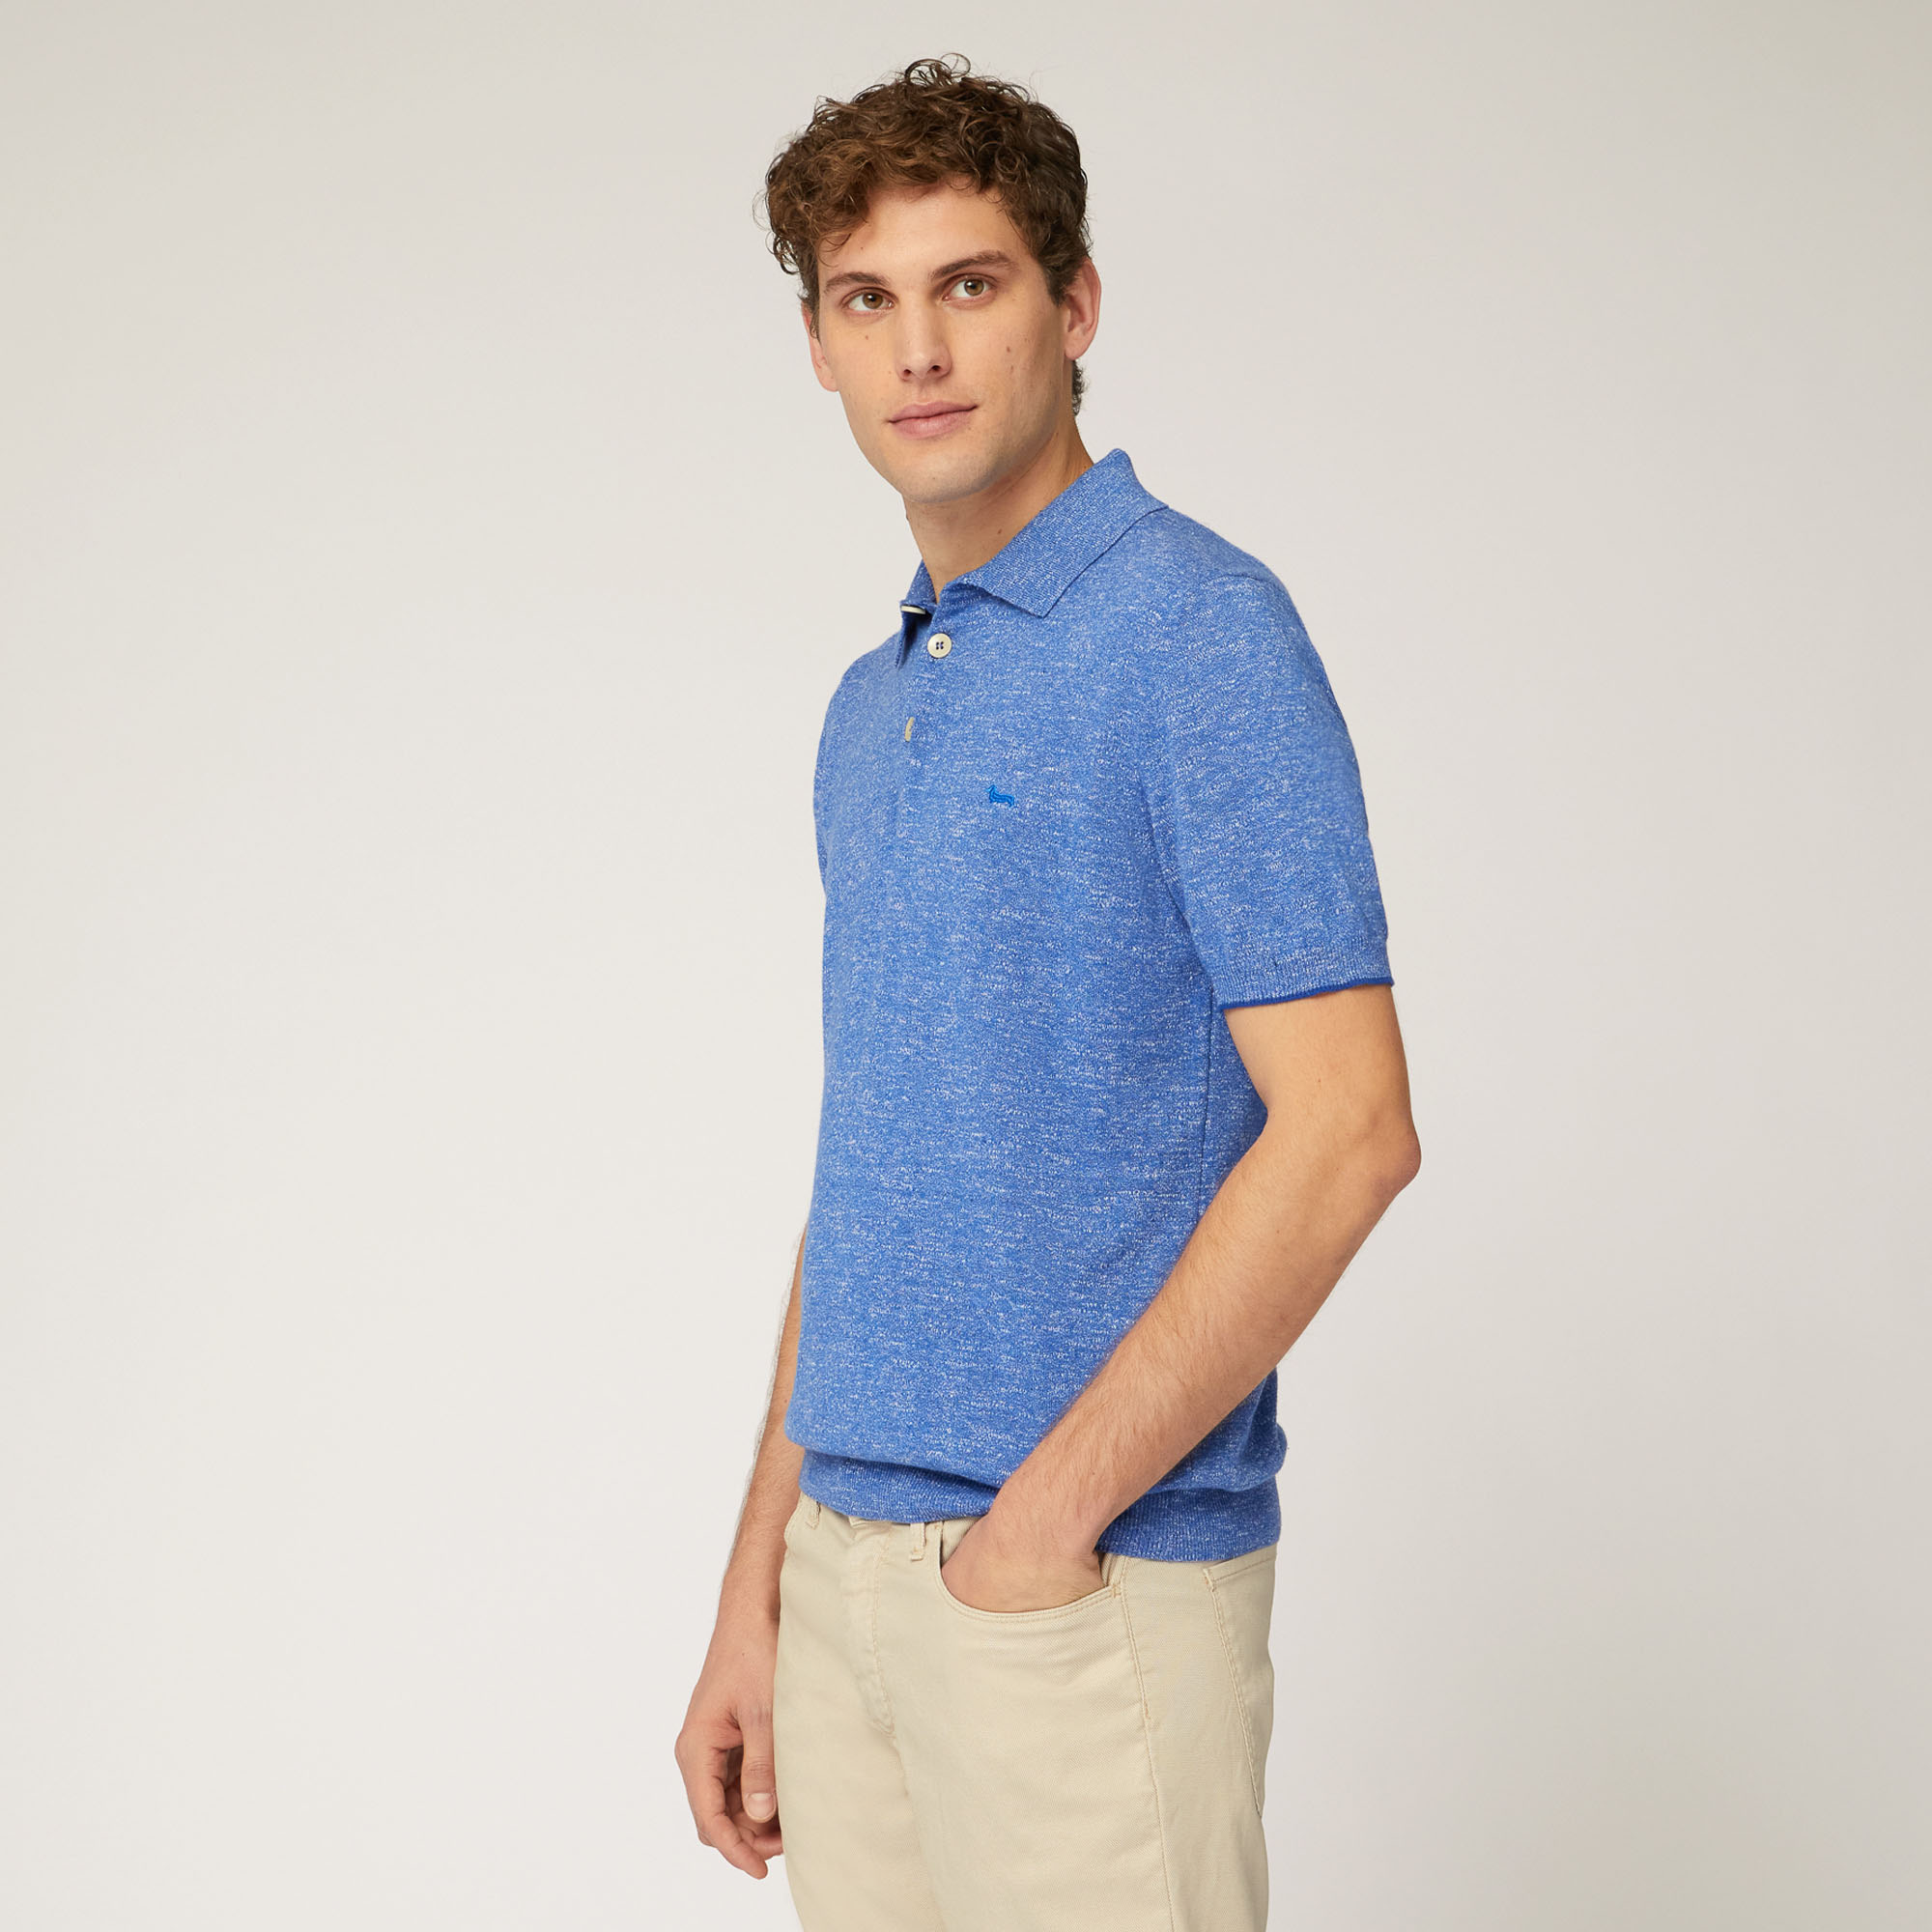 Cotton and Linen Tweed Polo, Light Blue, large image number 0